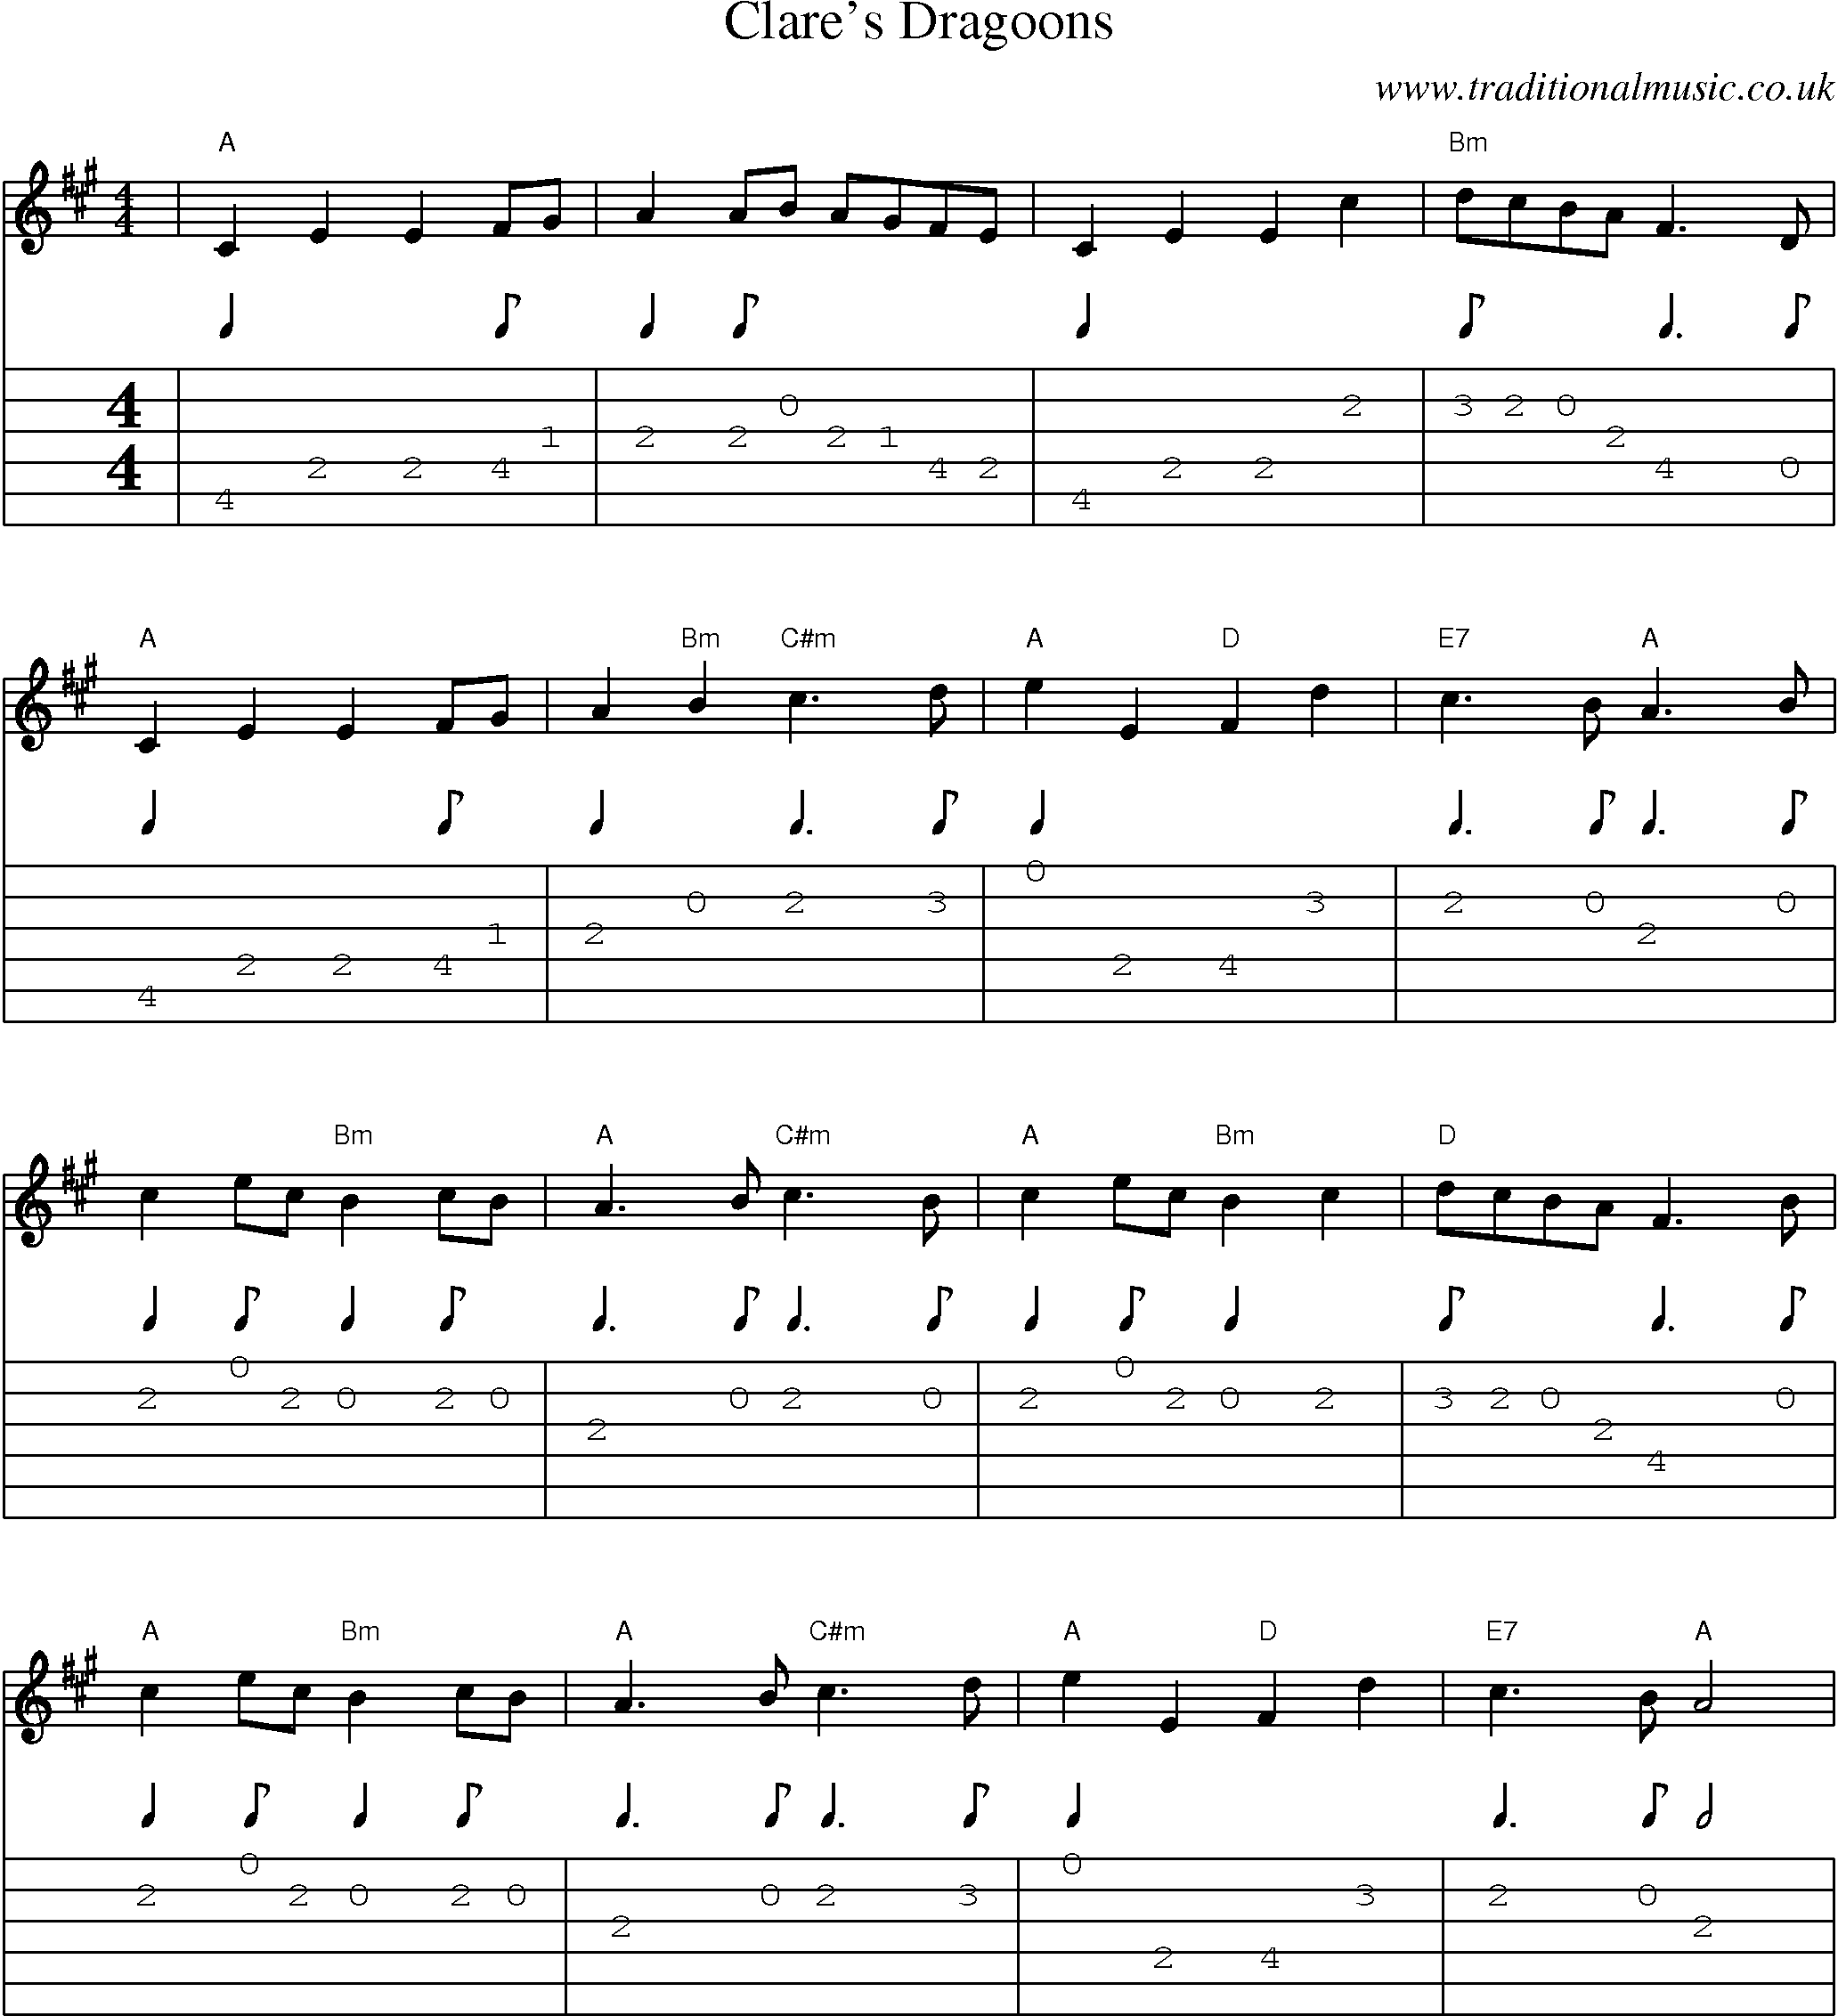 Music Score and Guitar Tabs for Clares Dragoons